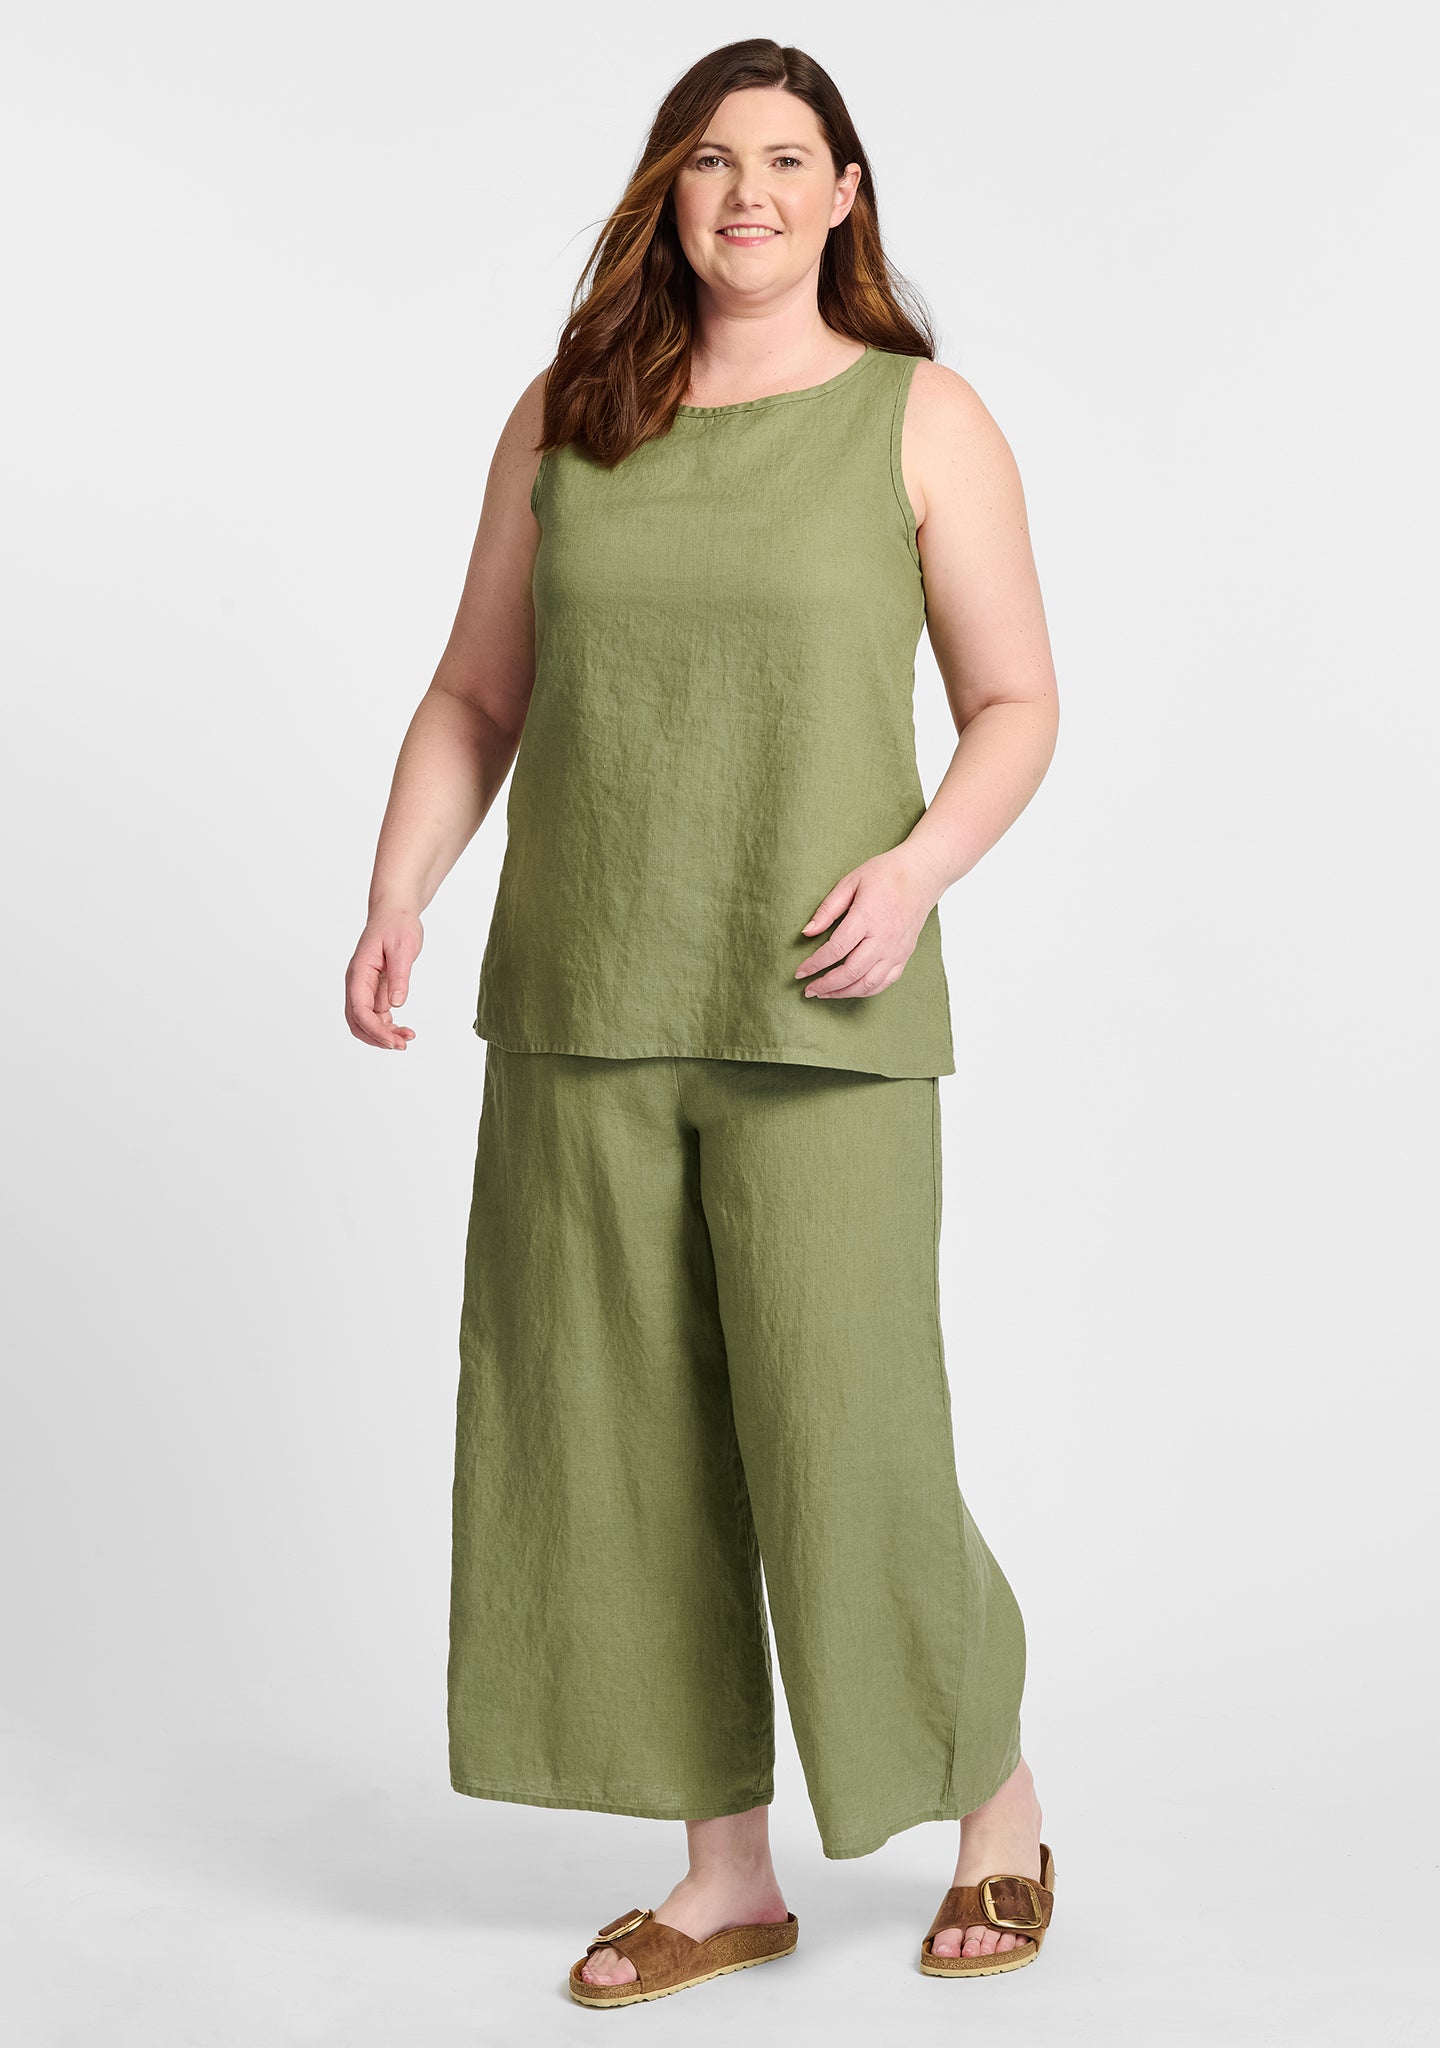 FLAX linen tank in green with linen pants in green